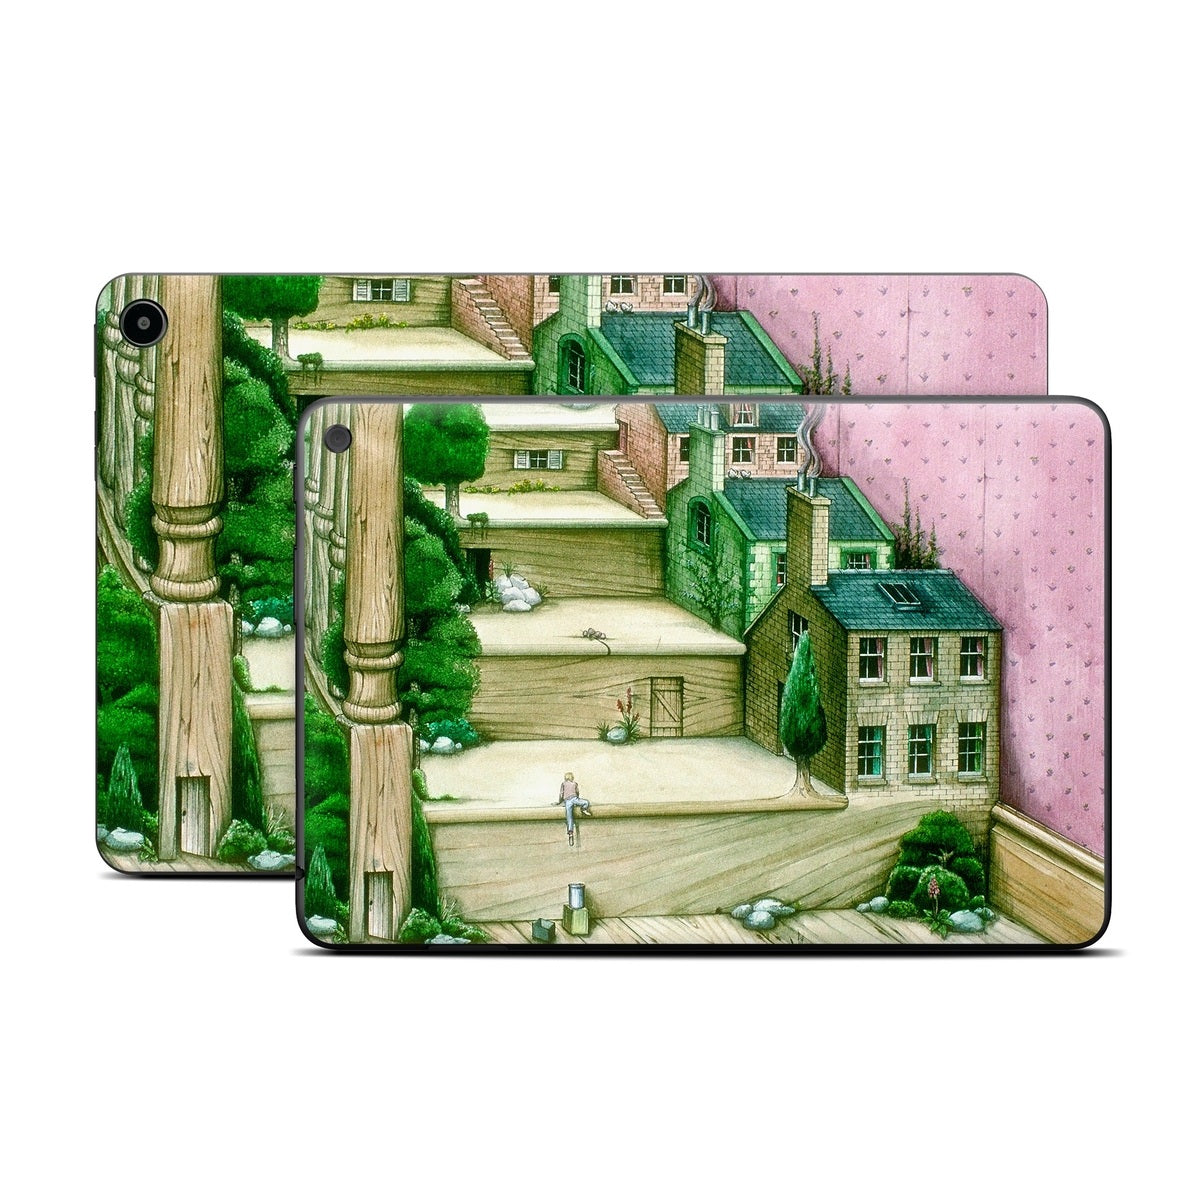 Living Stairs - Amazon Fire Skin